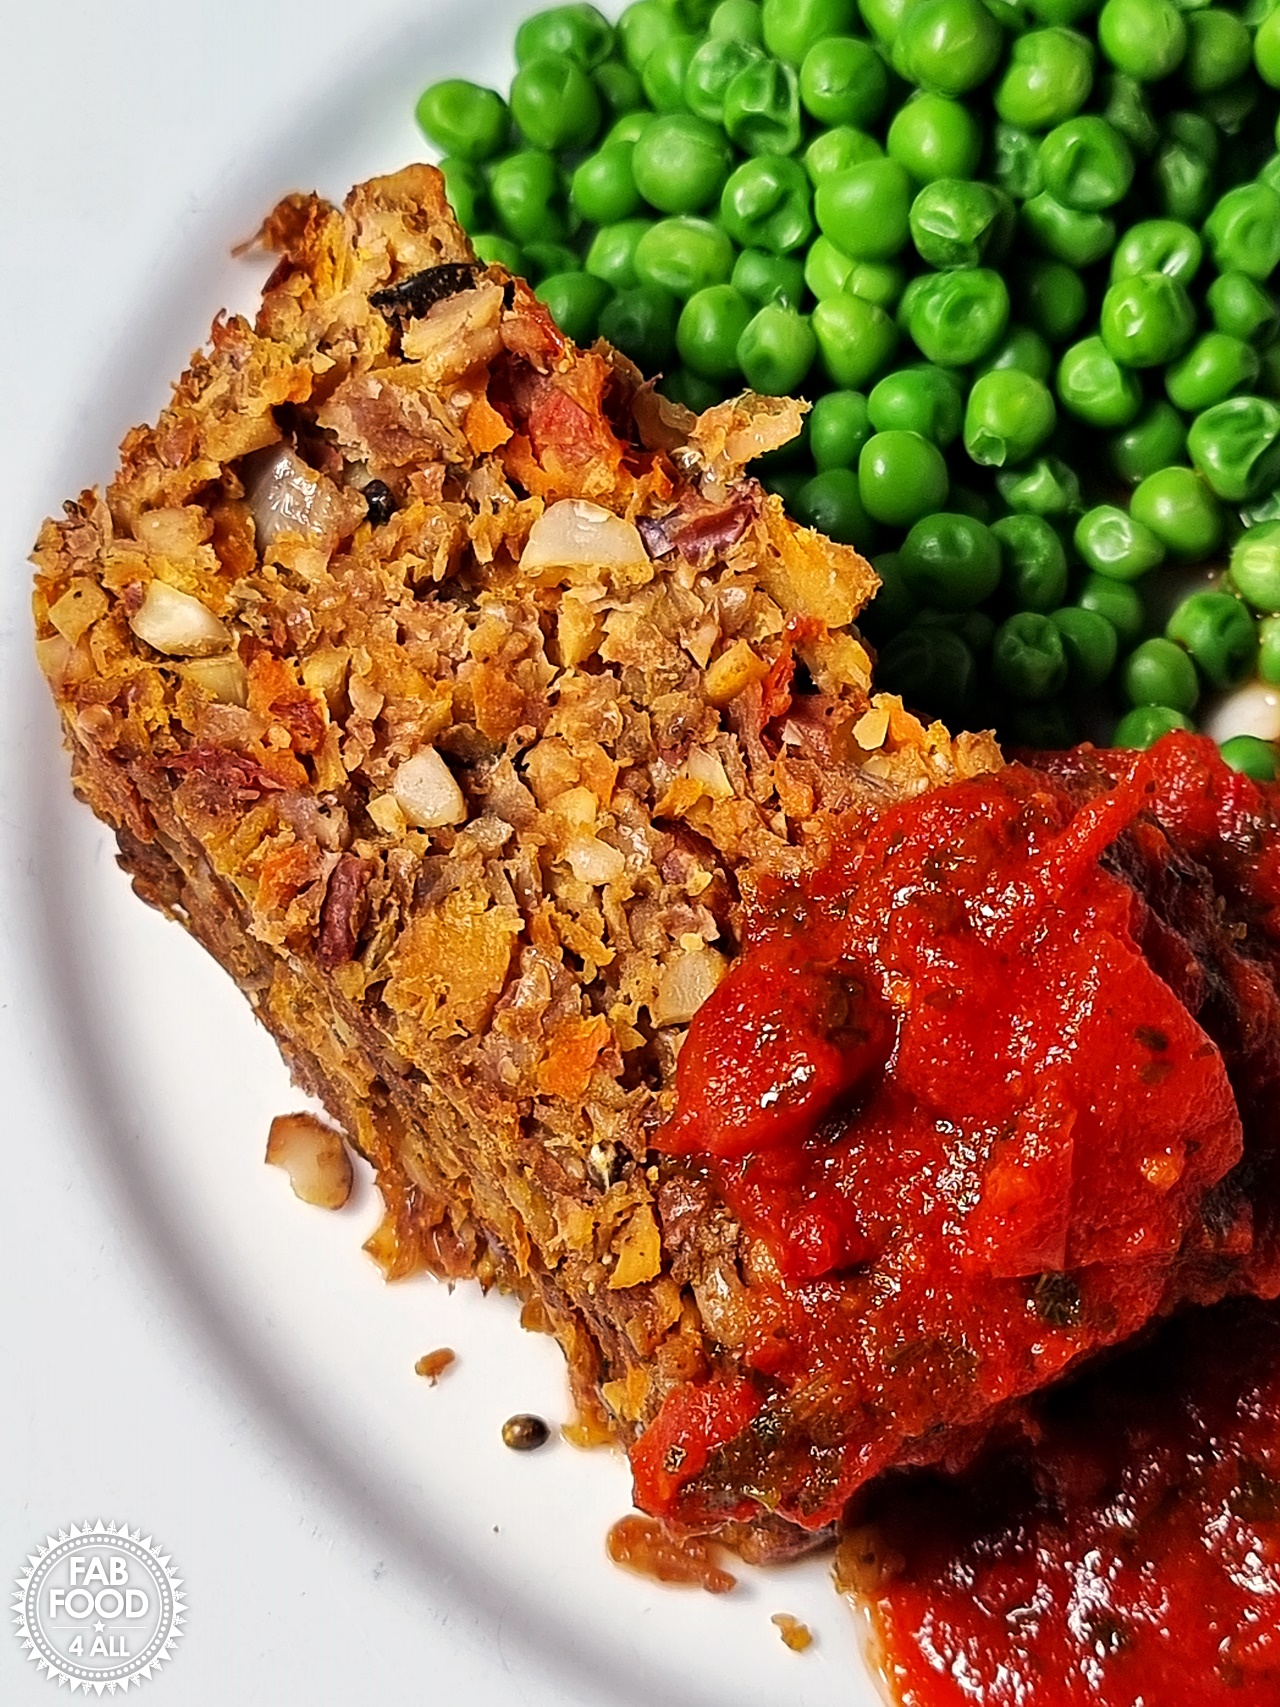 Nut Roast on a plate with peas a chilli sauce.